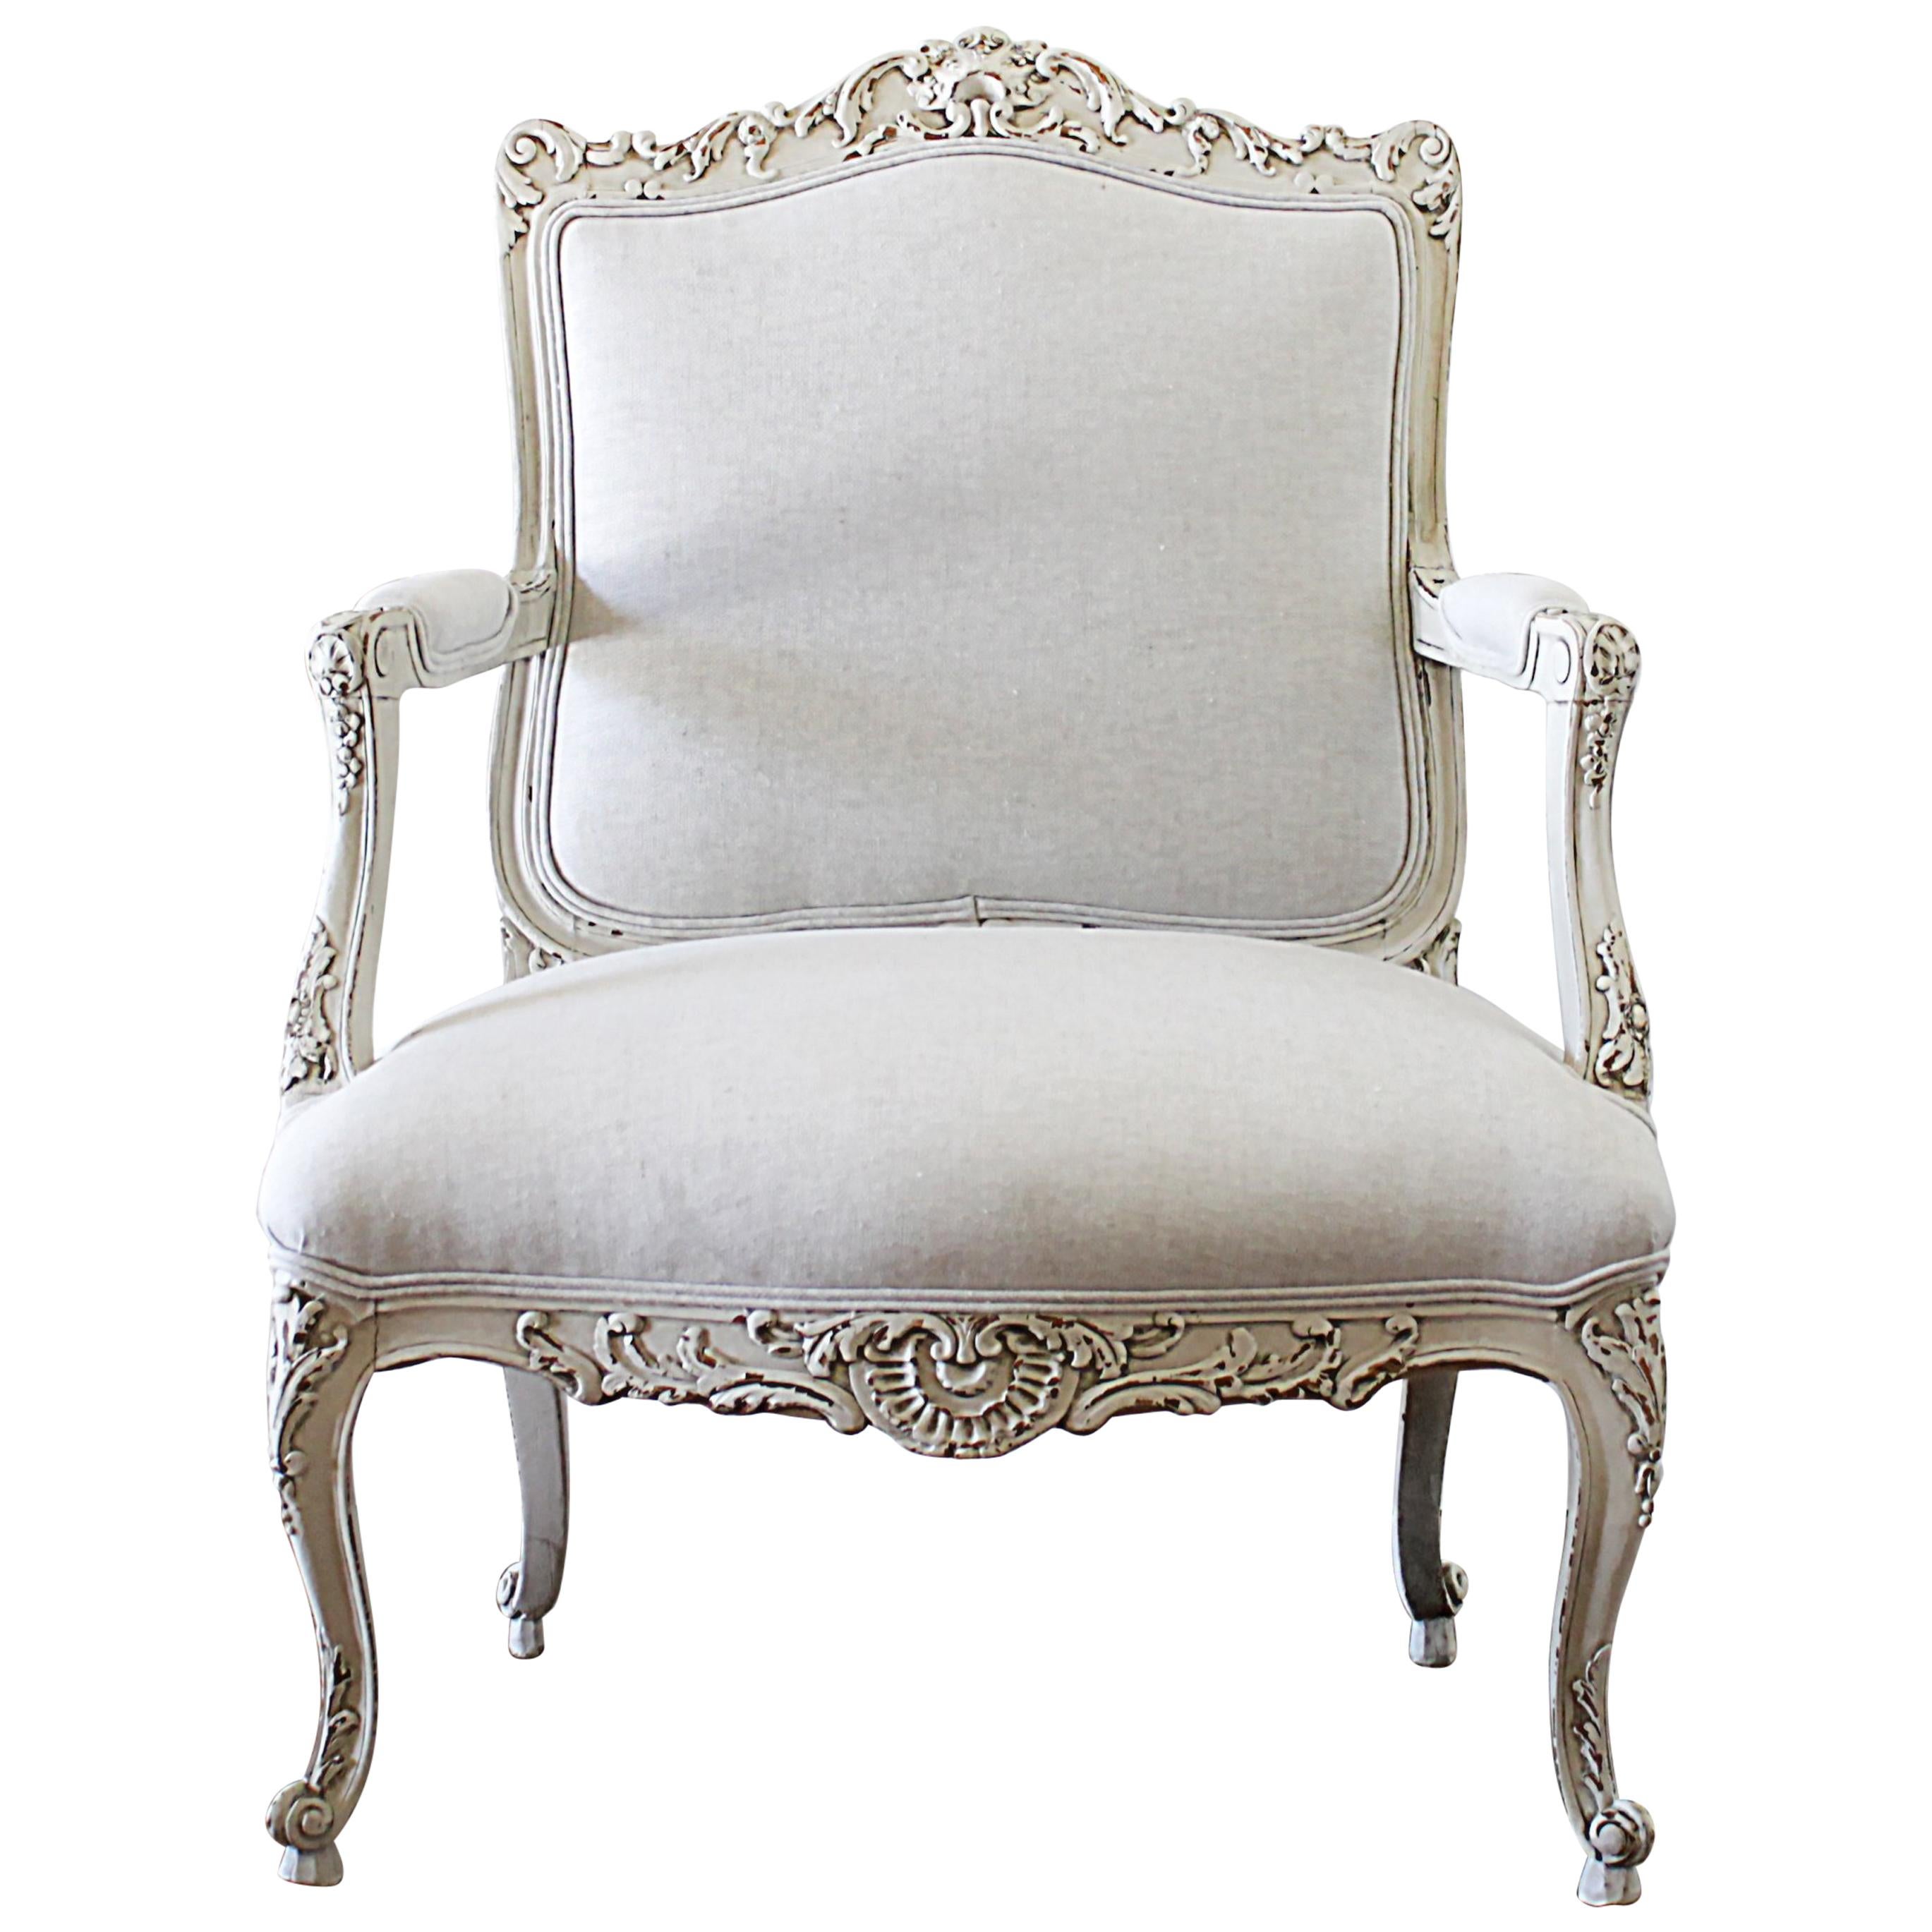 LOUIS XV ARM CHAIR FRENCH STYLE CHAIR VINTAGE WHITE LEATHER LOOK SILVER WOOD 